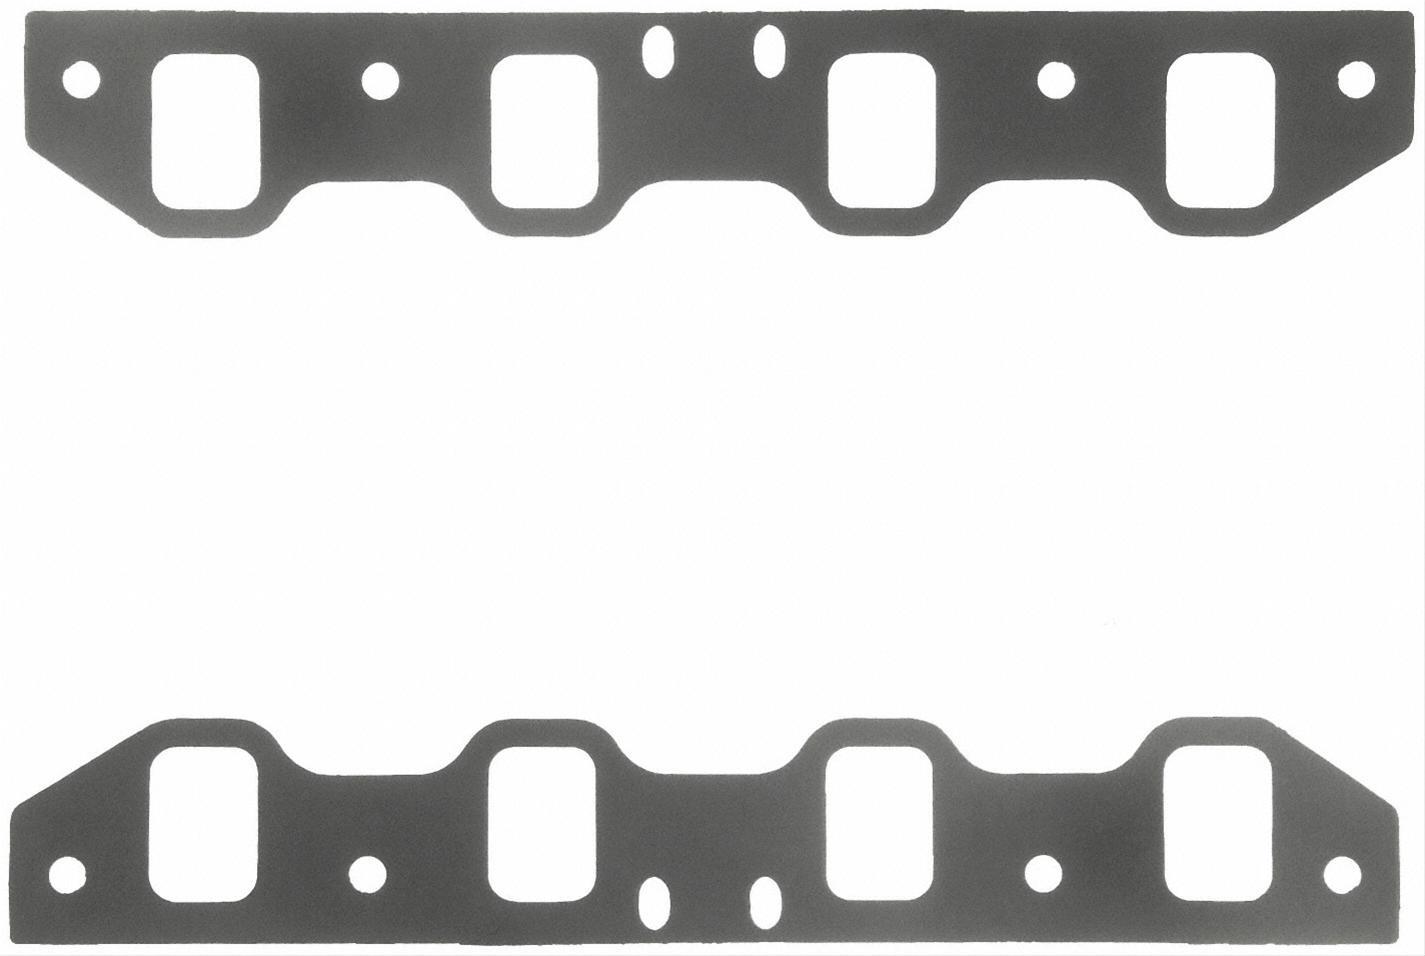 Fel-pro 12531 ford performance intake manifold gasket sets .030" thick -